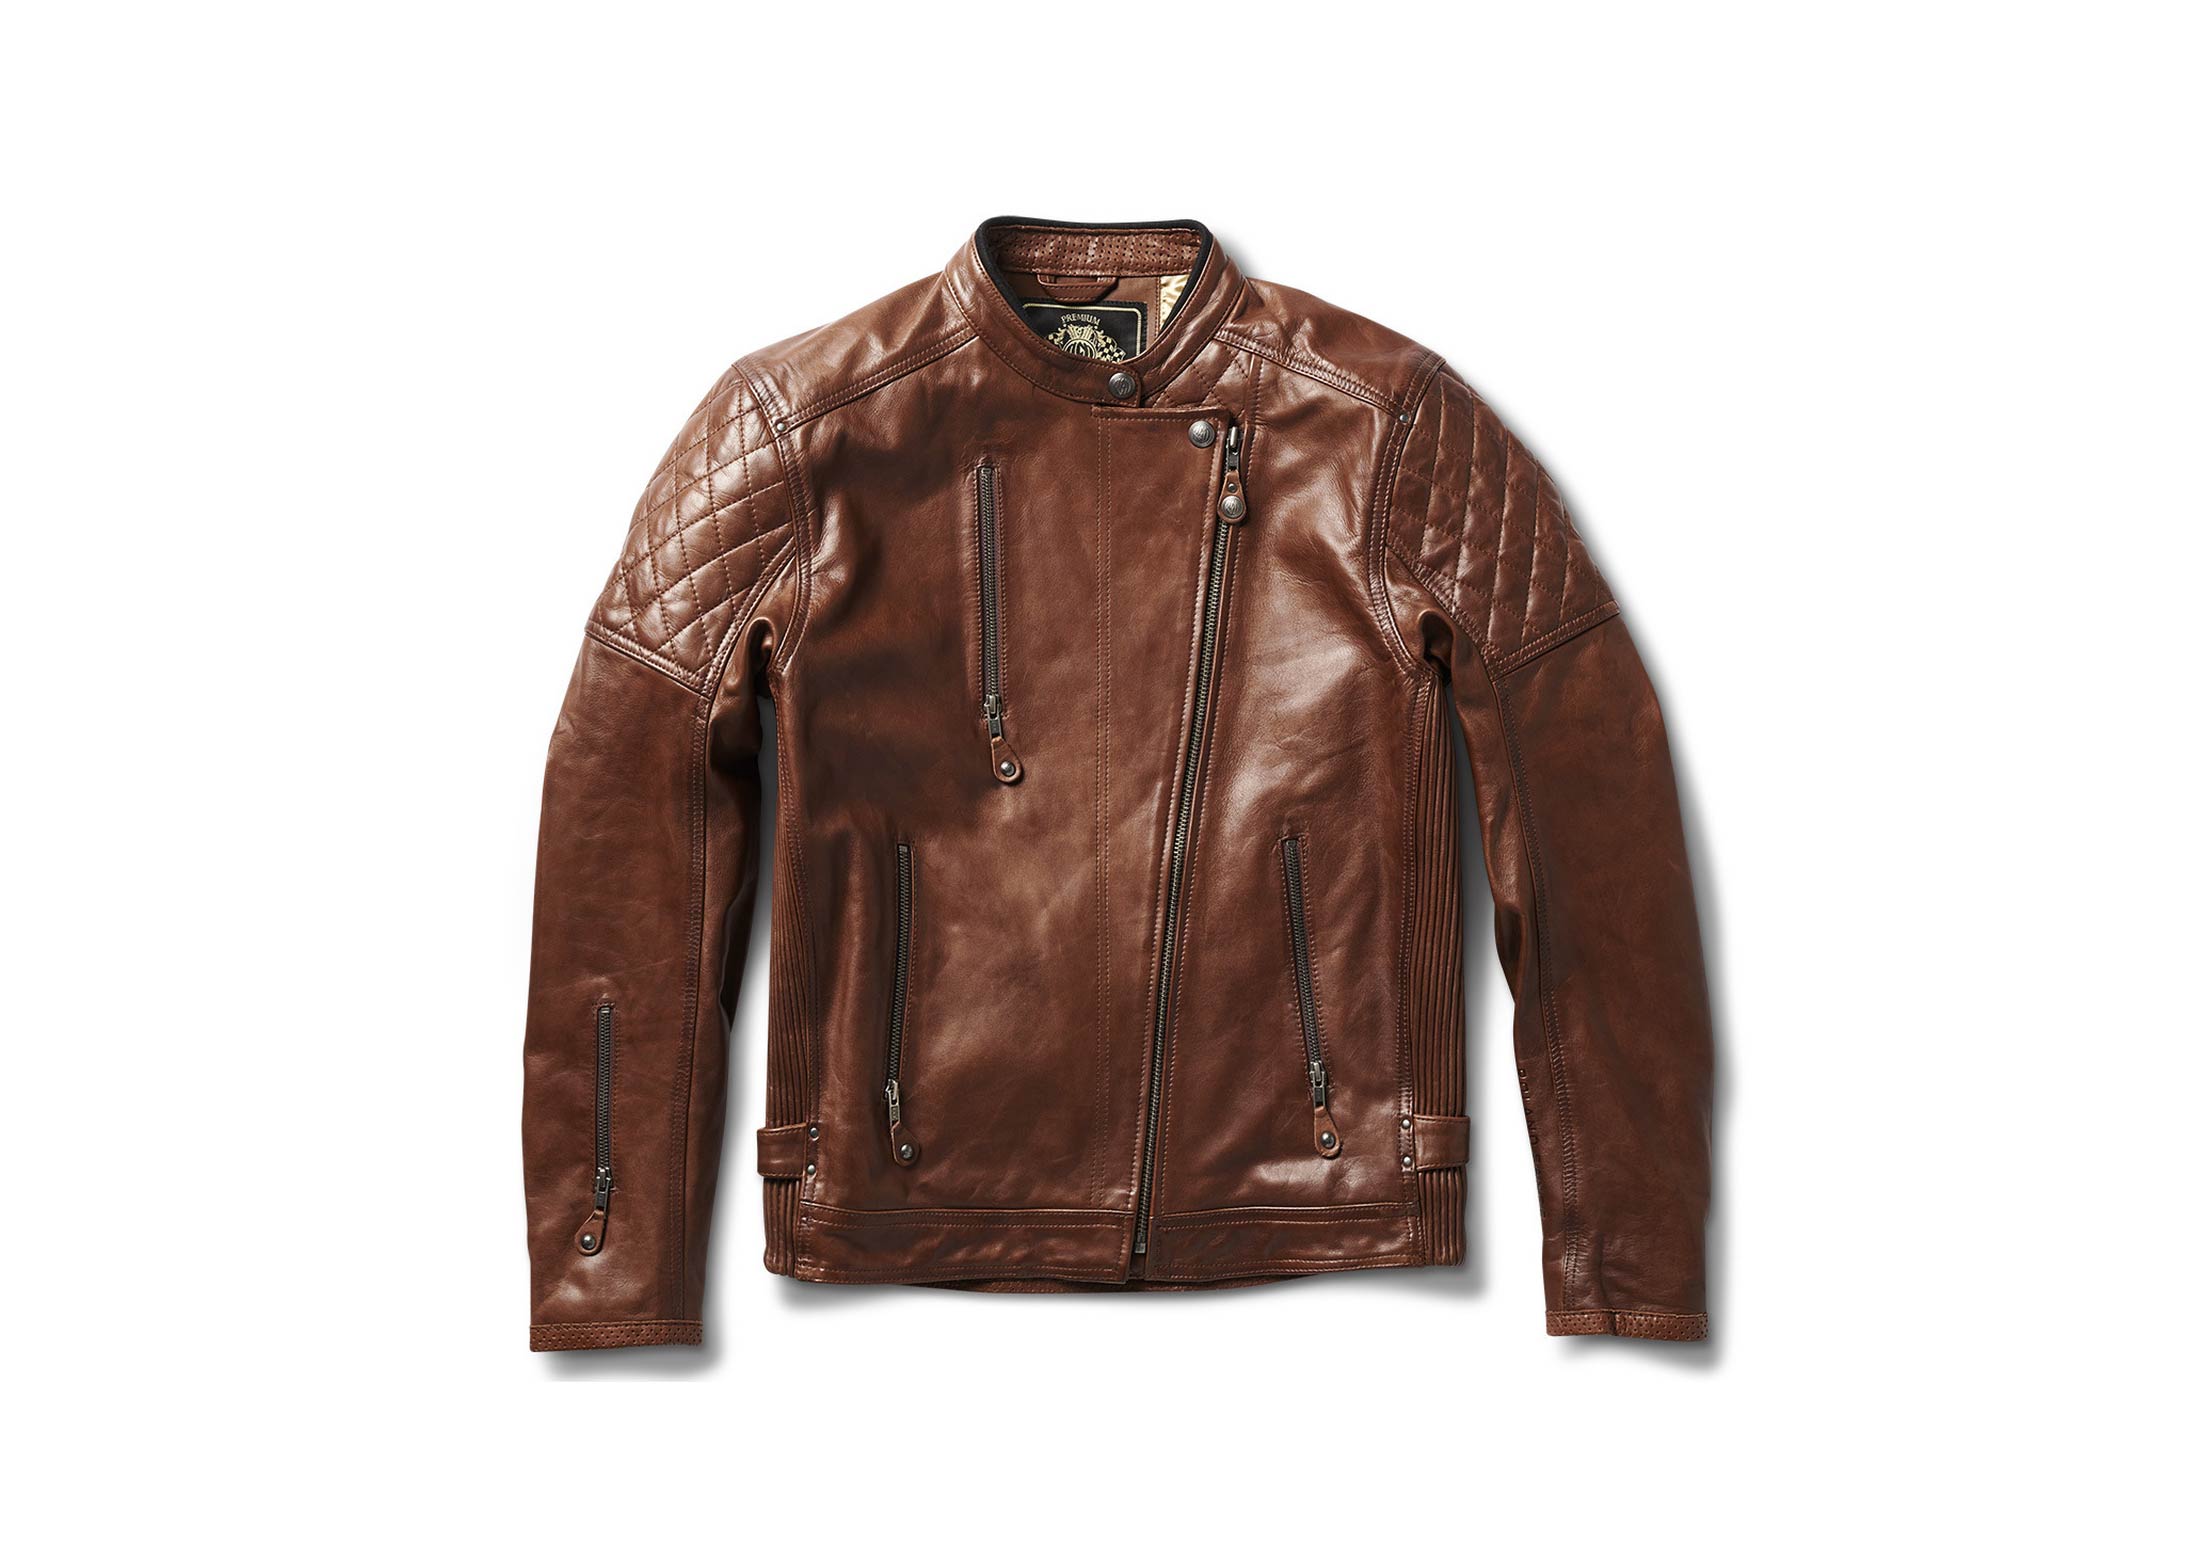 Clash Leather Motorcycle Jacket by Roland Sands Design